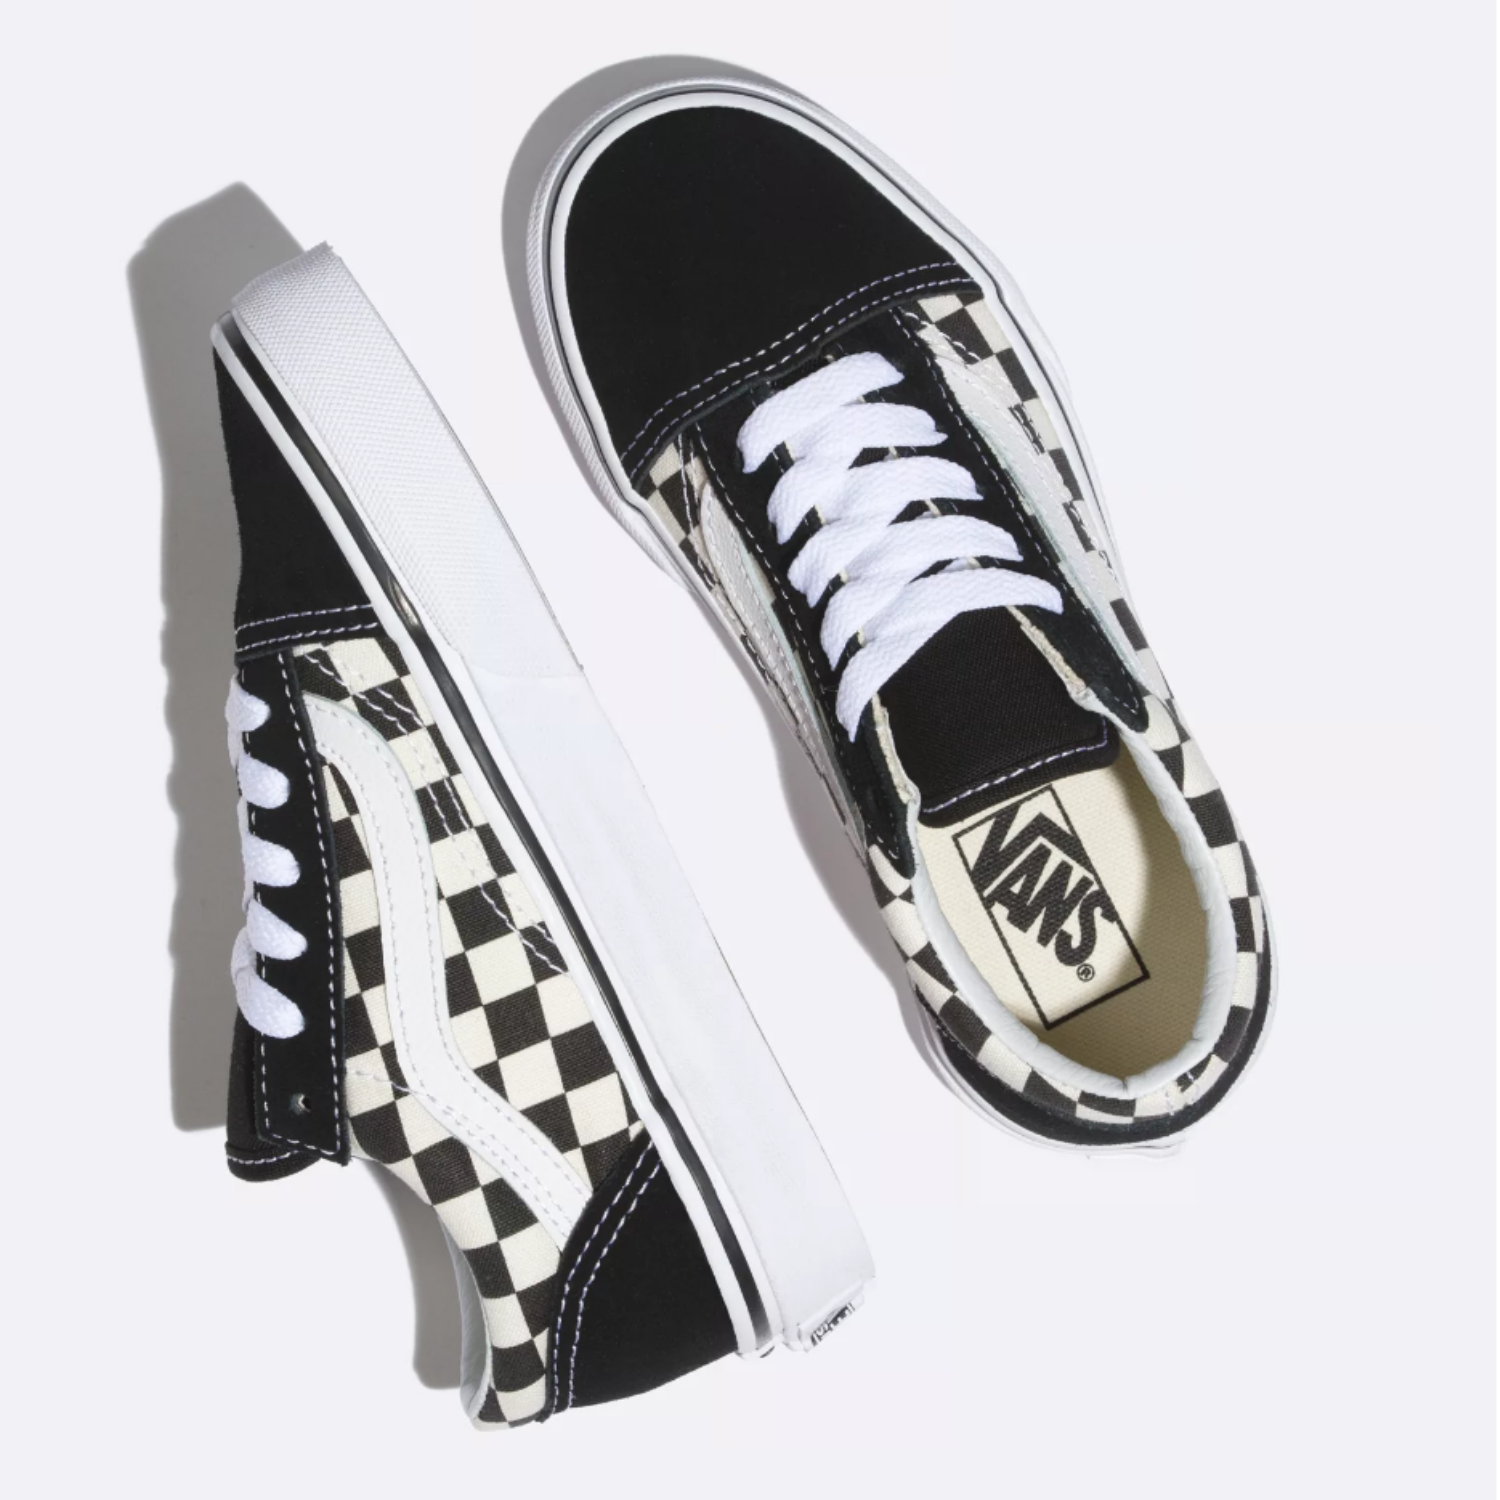 vans checkerboard youth